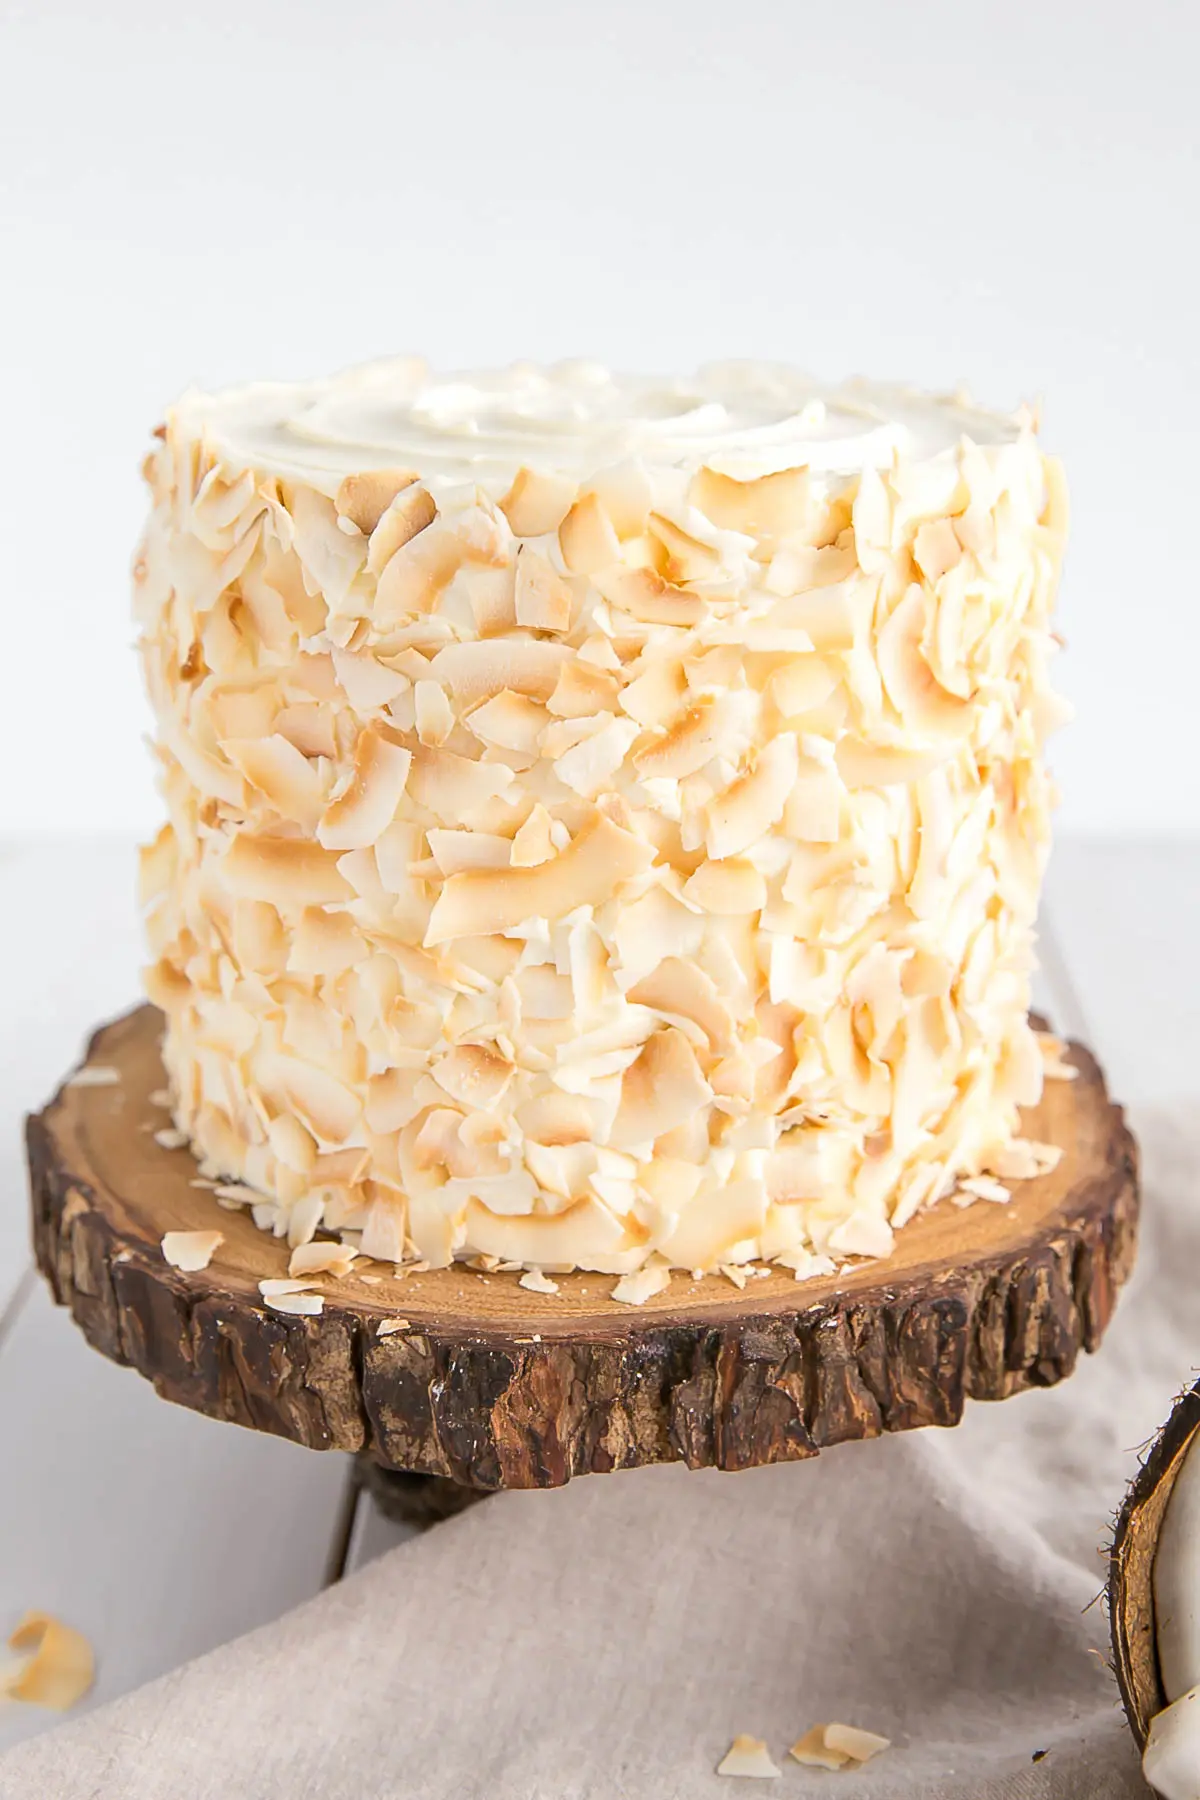 Toasted coconut flakes decorate the outside of the cake.